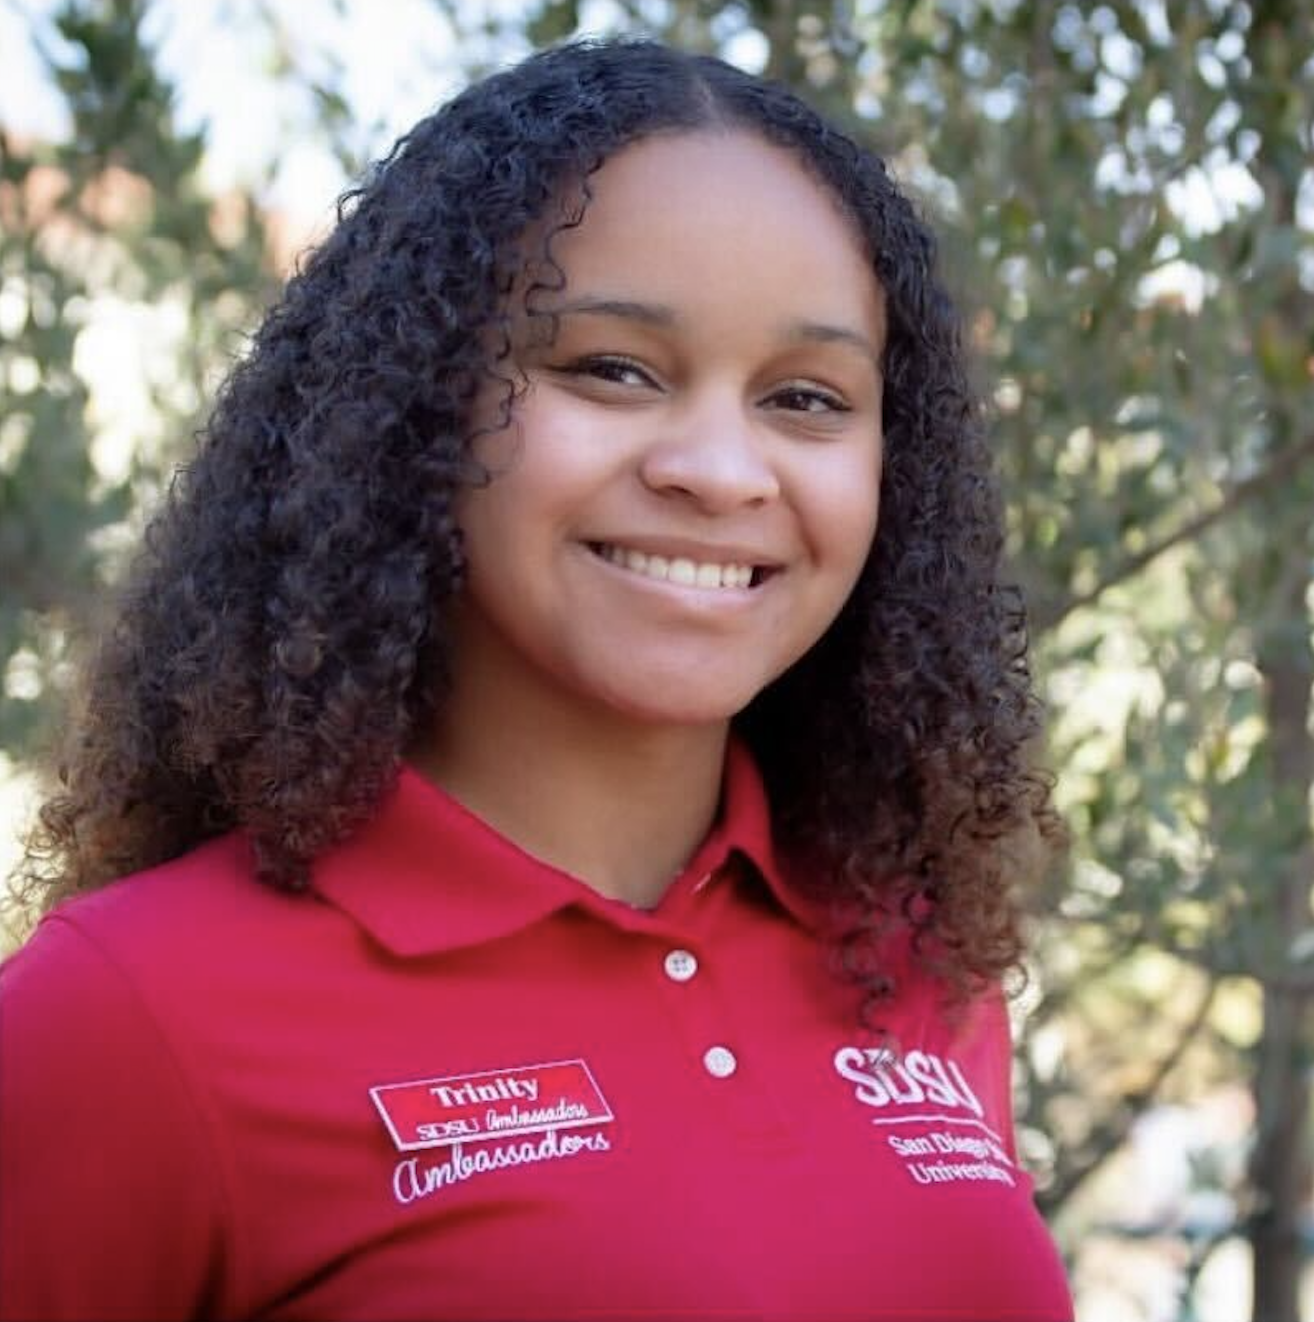 Headshot of Research Assistant Trinity Rivera wearing a red shirt and standing in front of a tree.